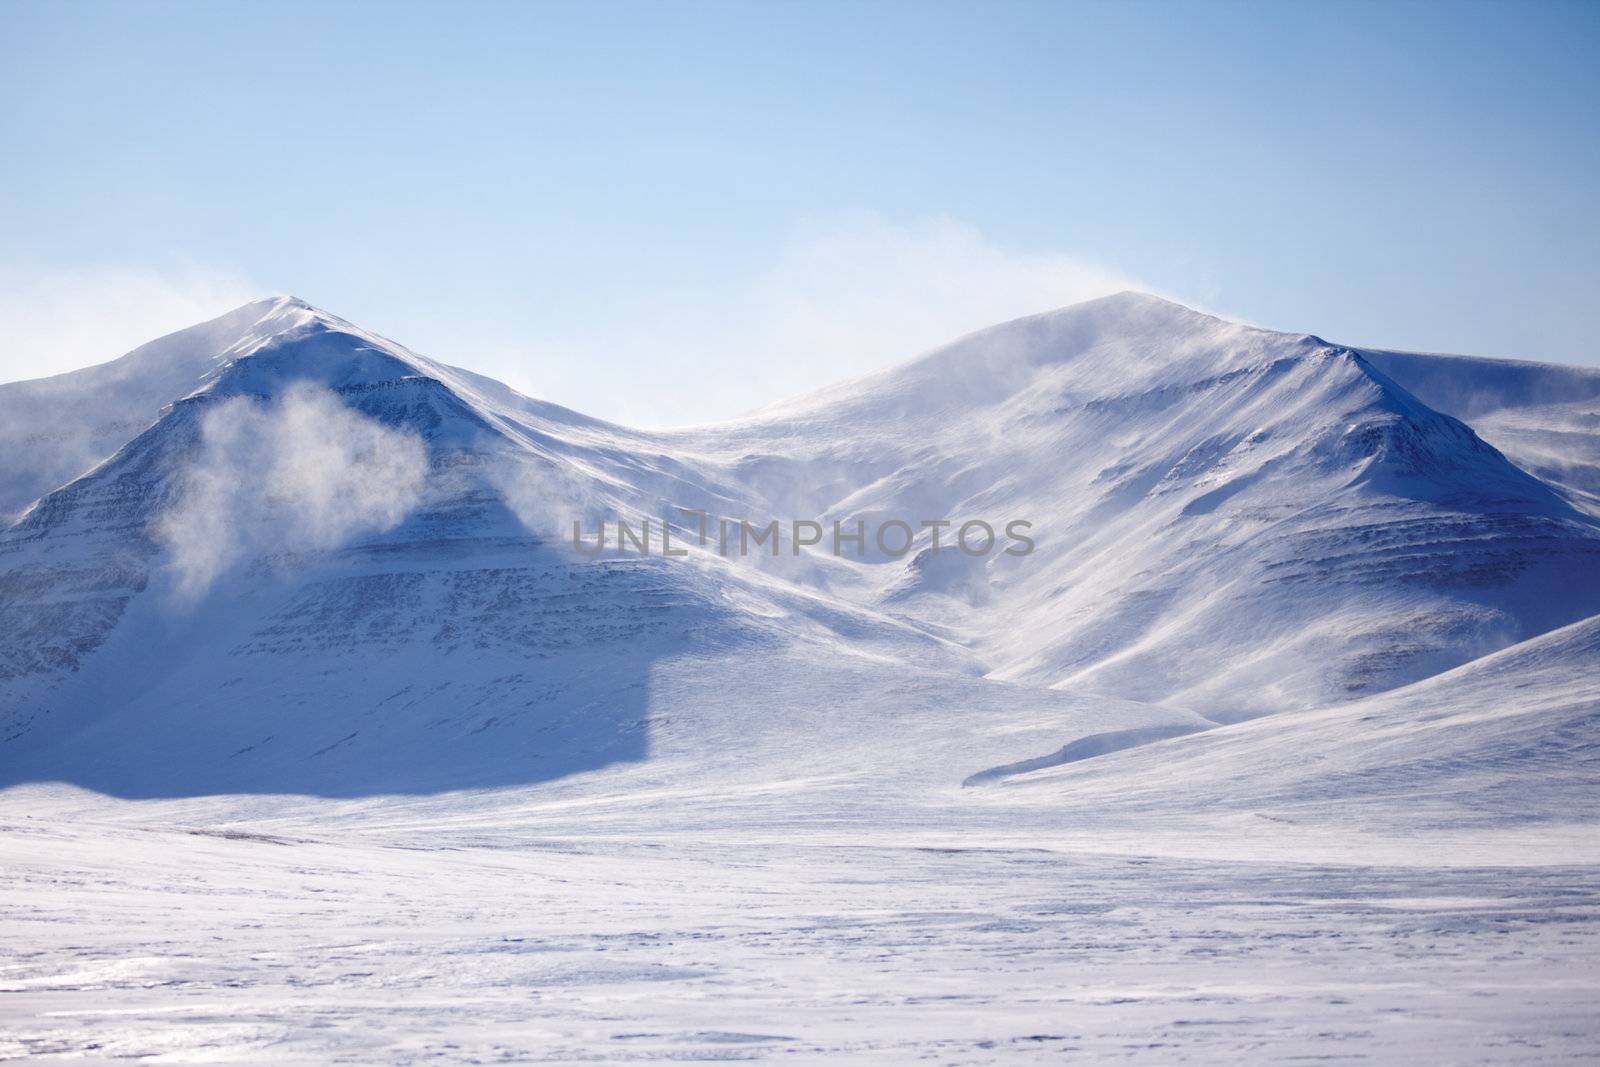 A mountain with blowing snow in a winter landscape